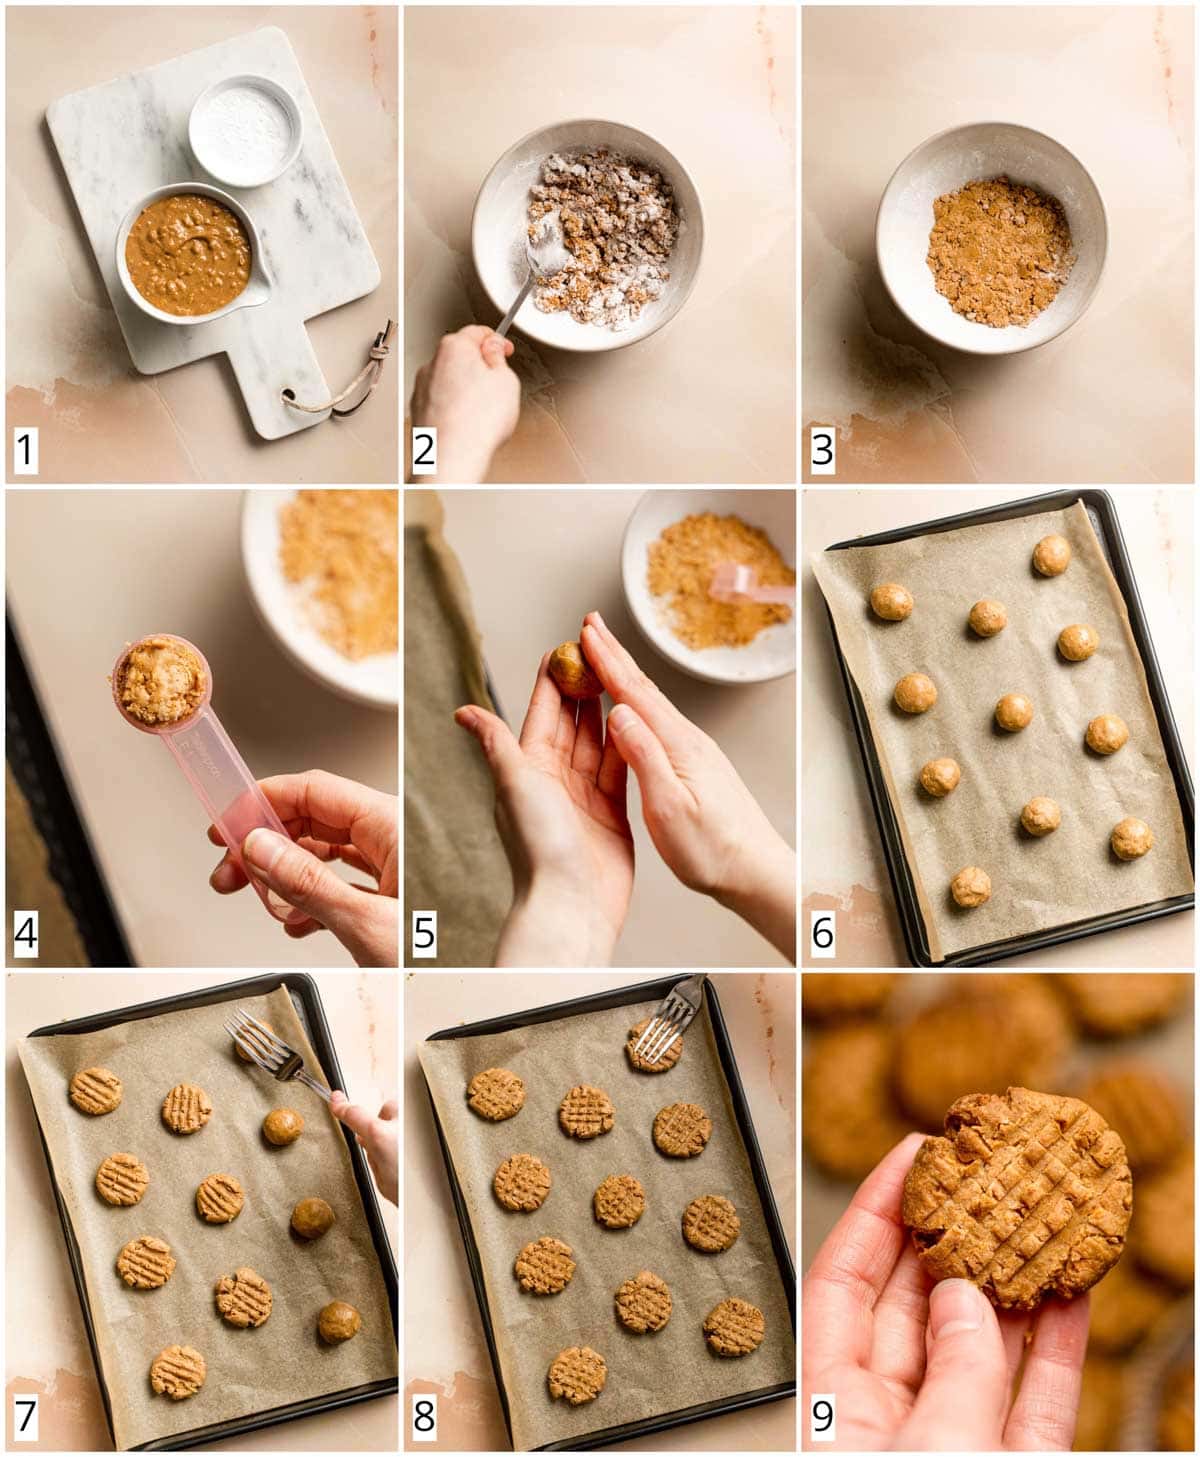 A collage of 9 images showing the process of making cookies.